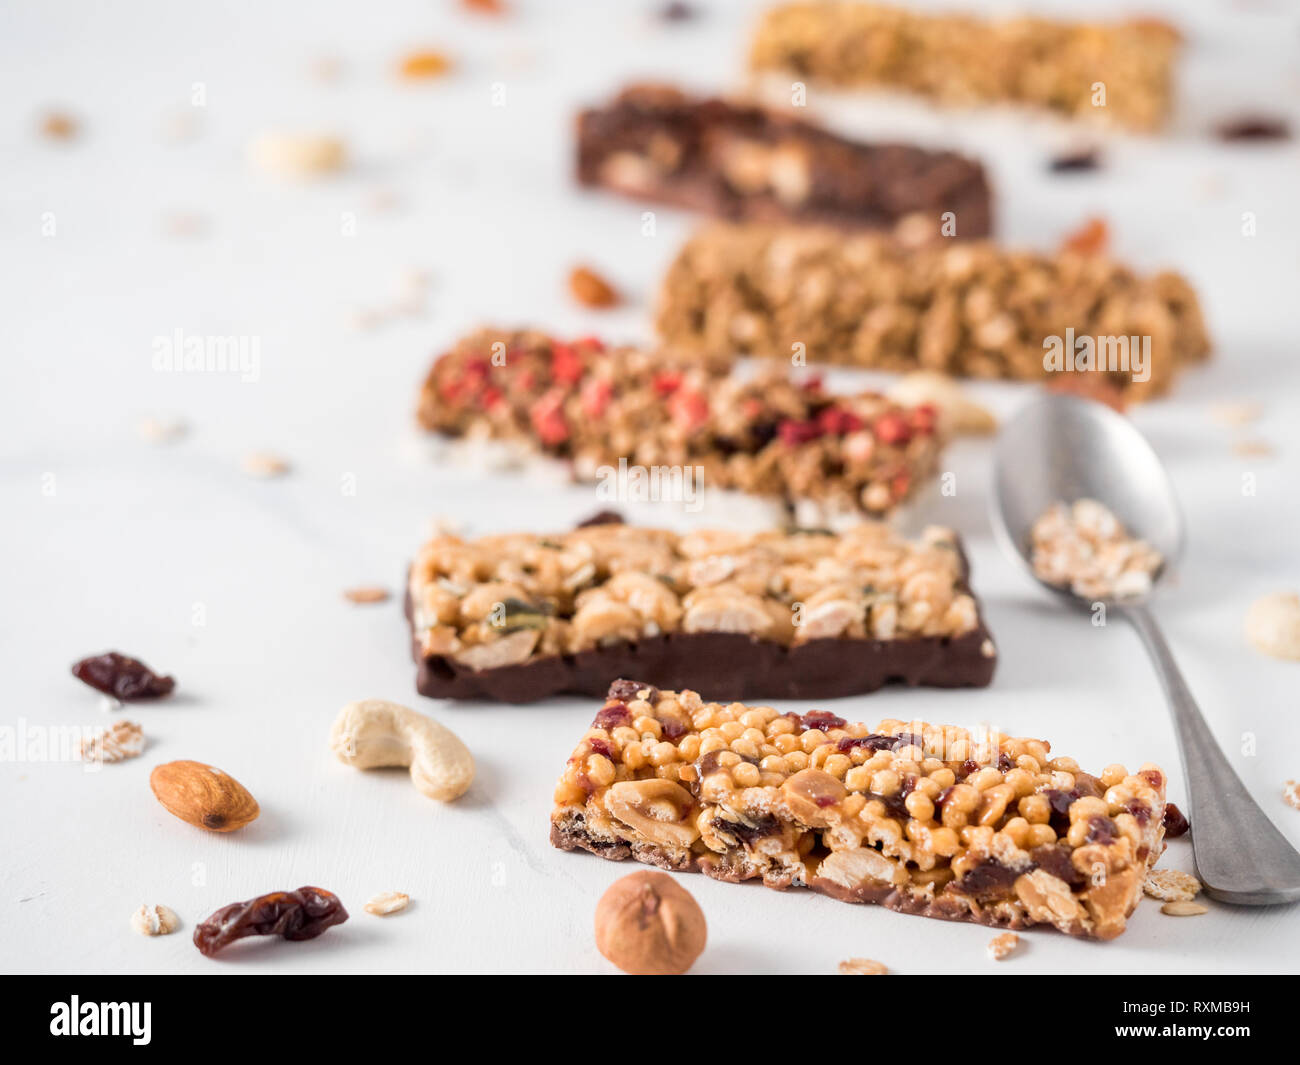 Granola bar with copy space. Set of different granola bars on white marble table. Shallow DOF. Stock Photo